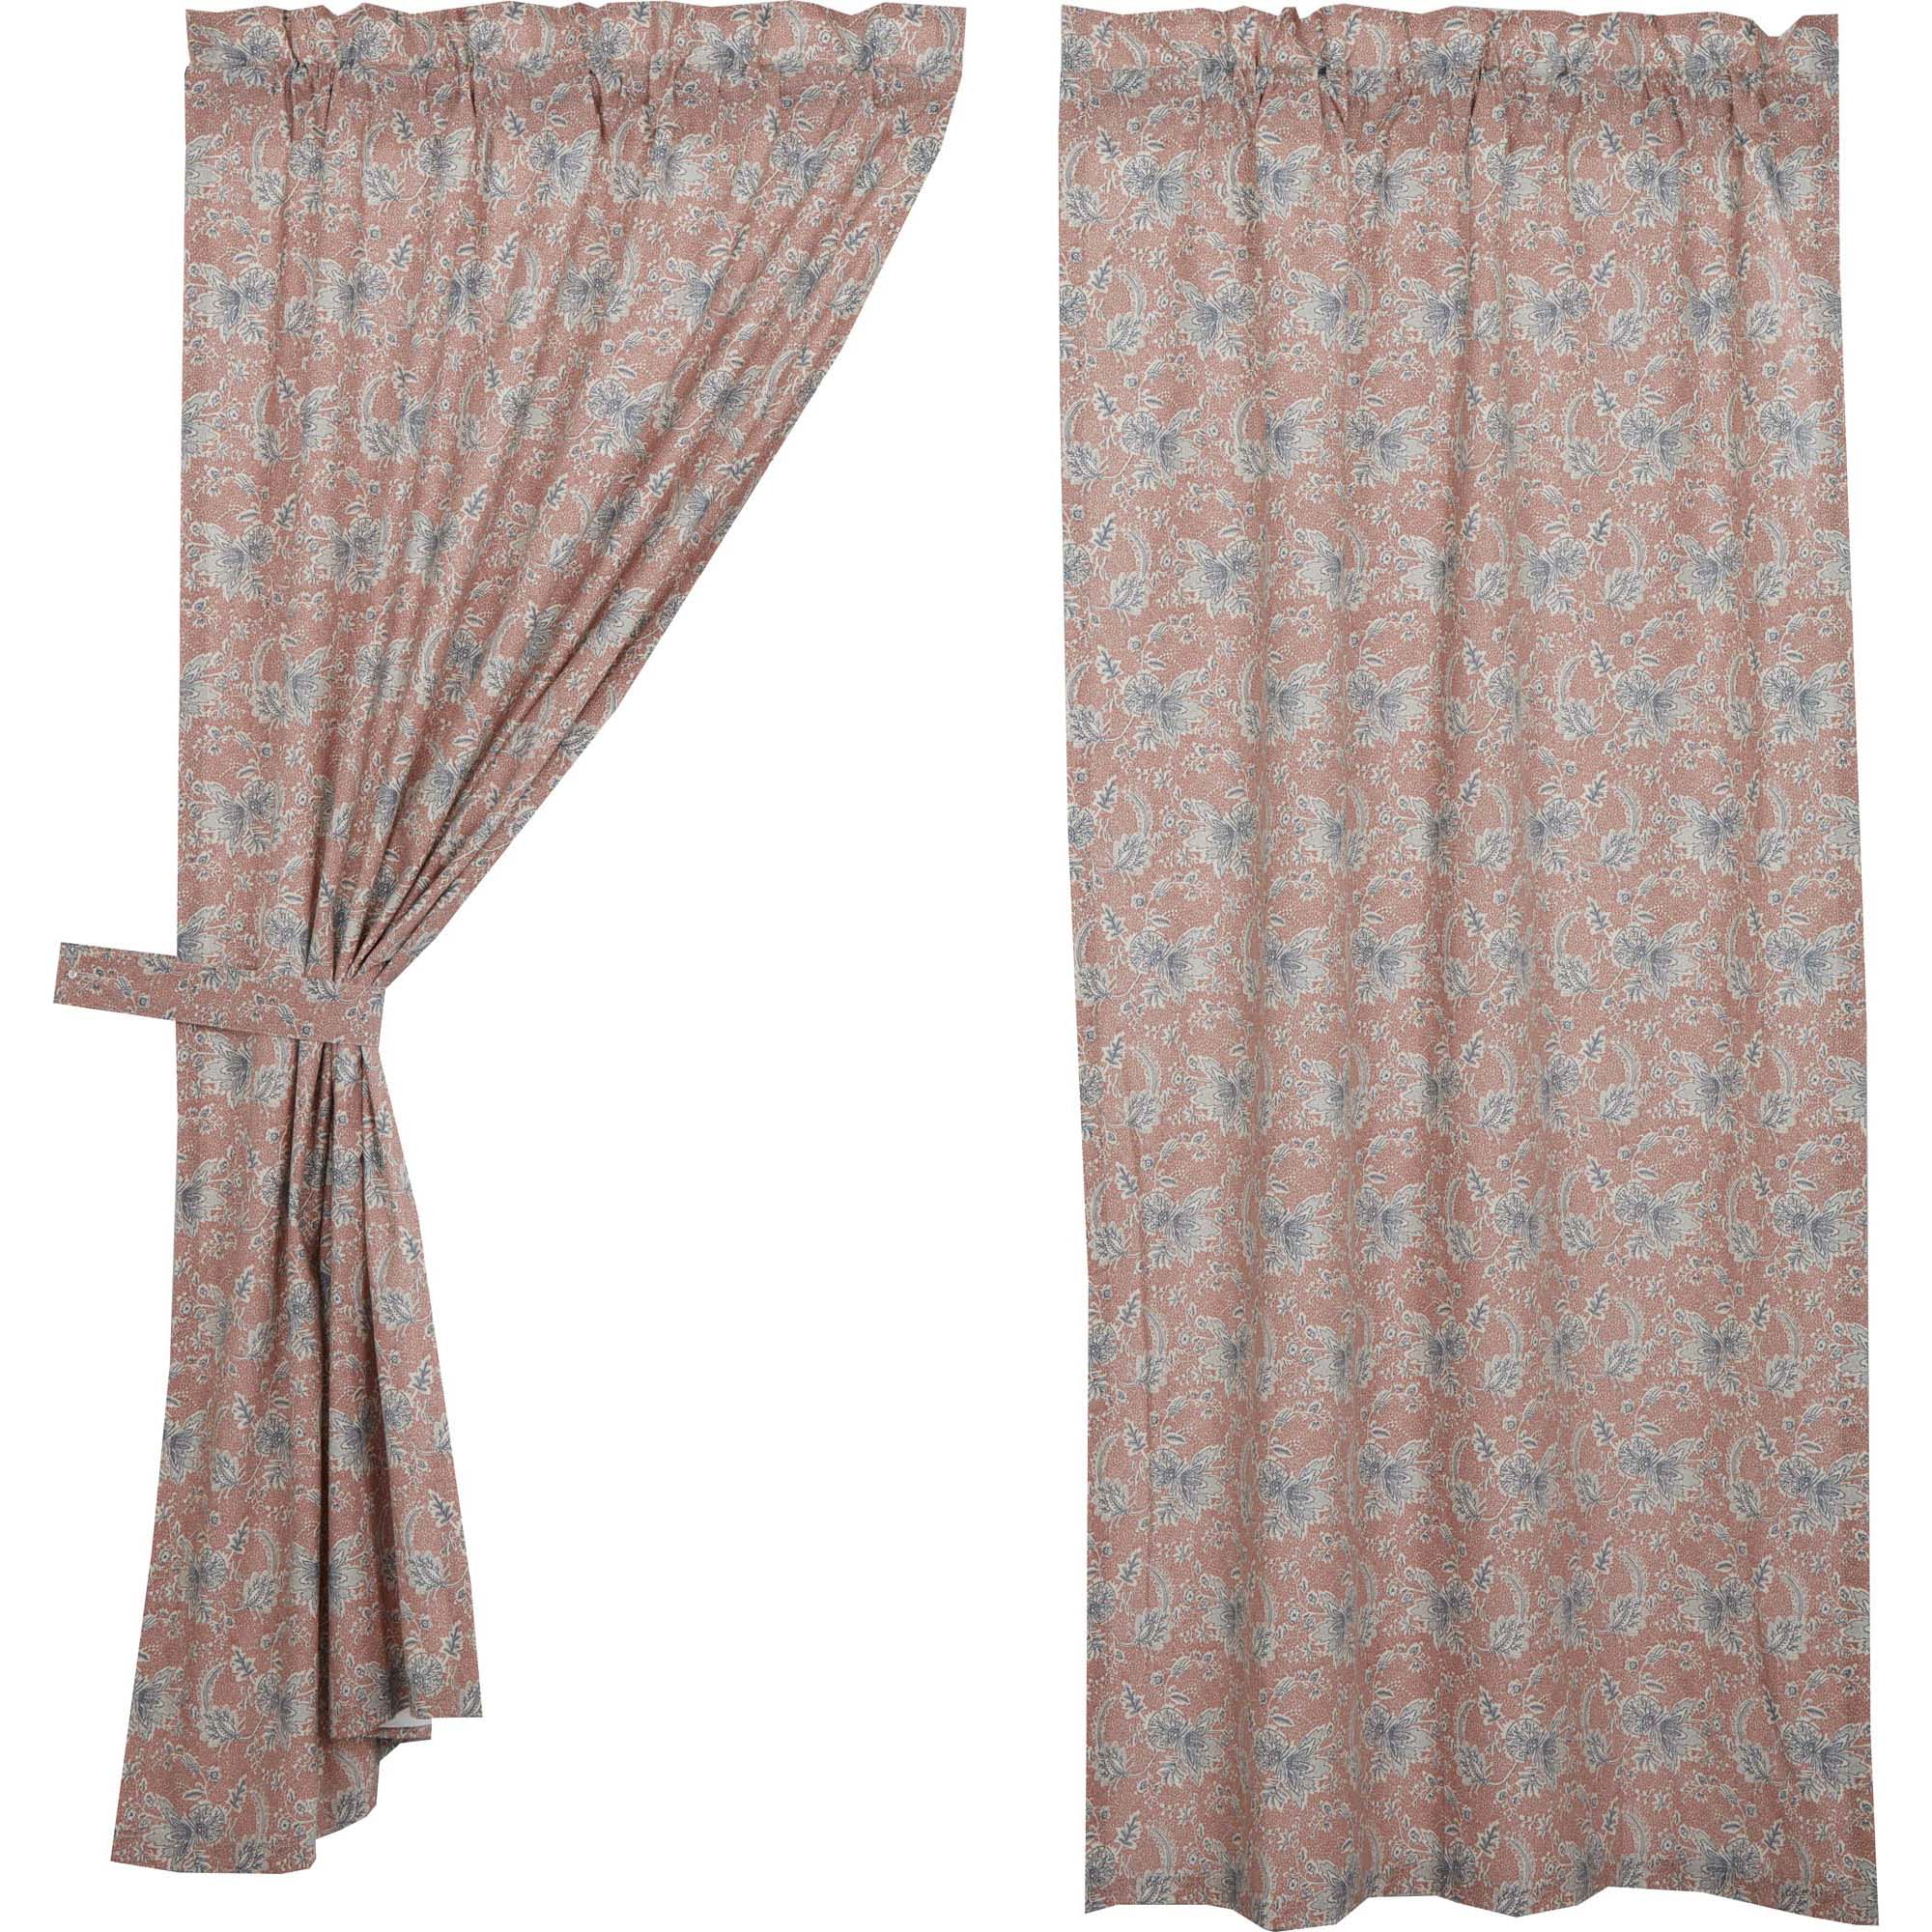 Kaila Floral Short Panel Set of 2 63x36 VHC Brands